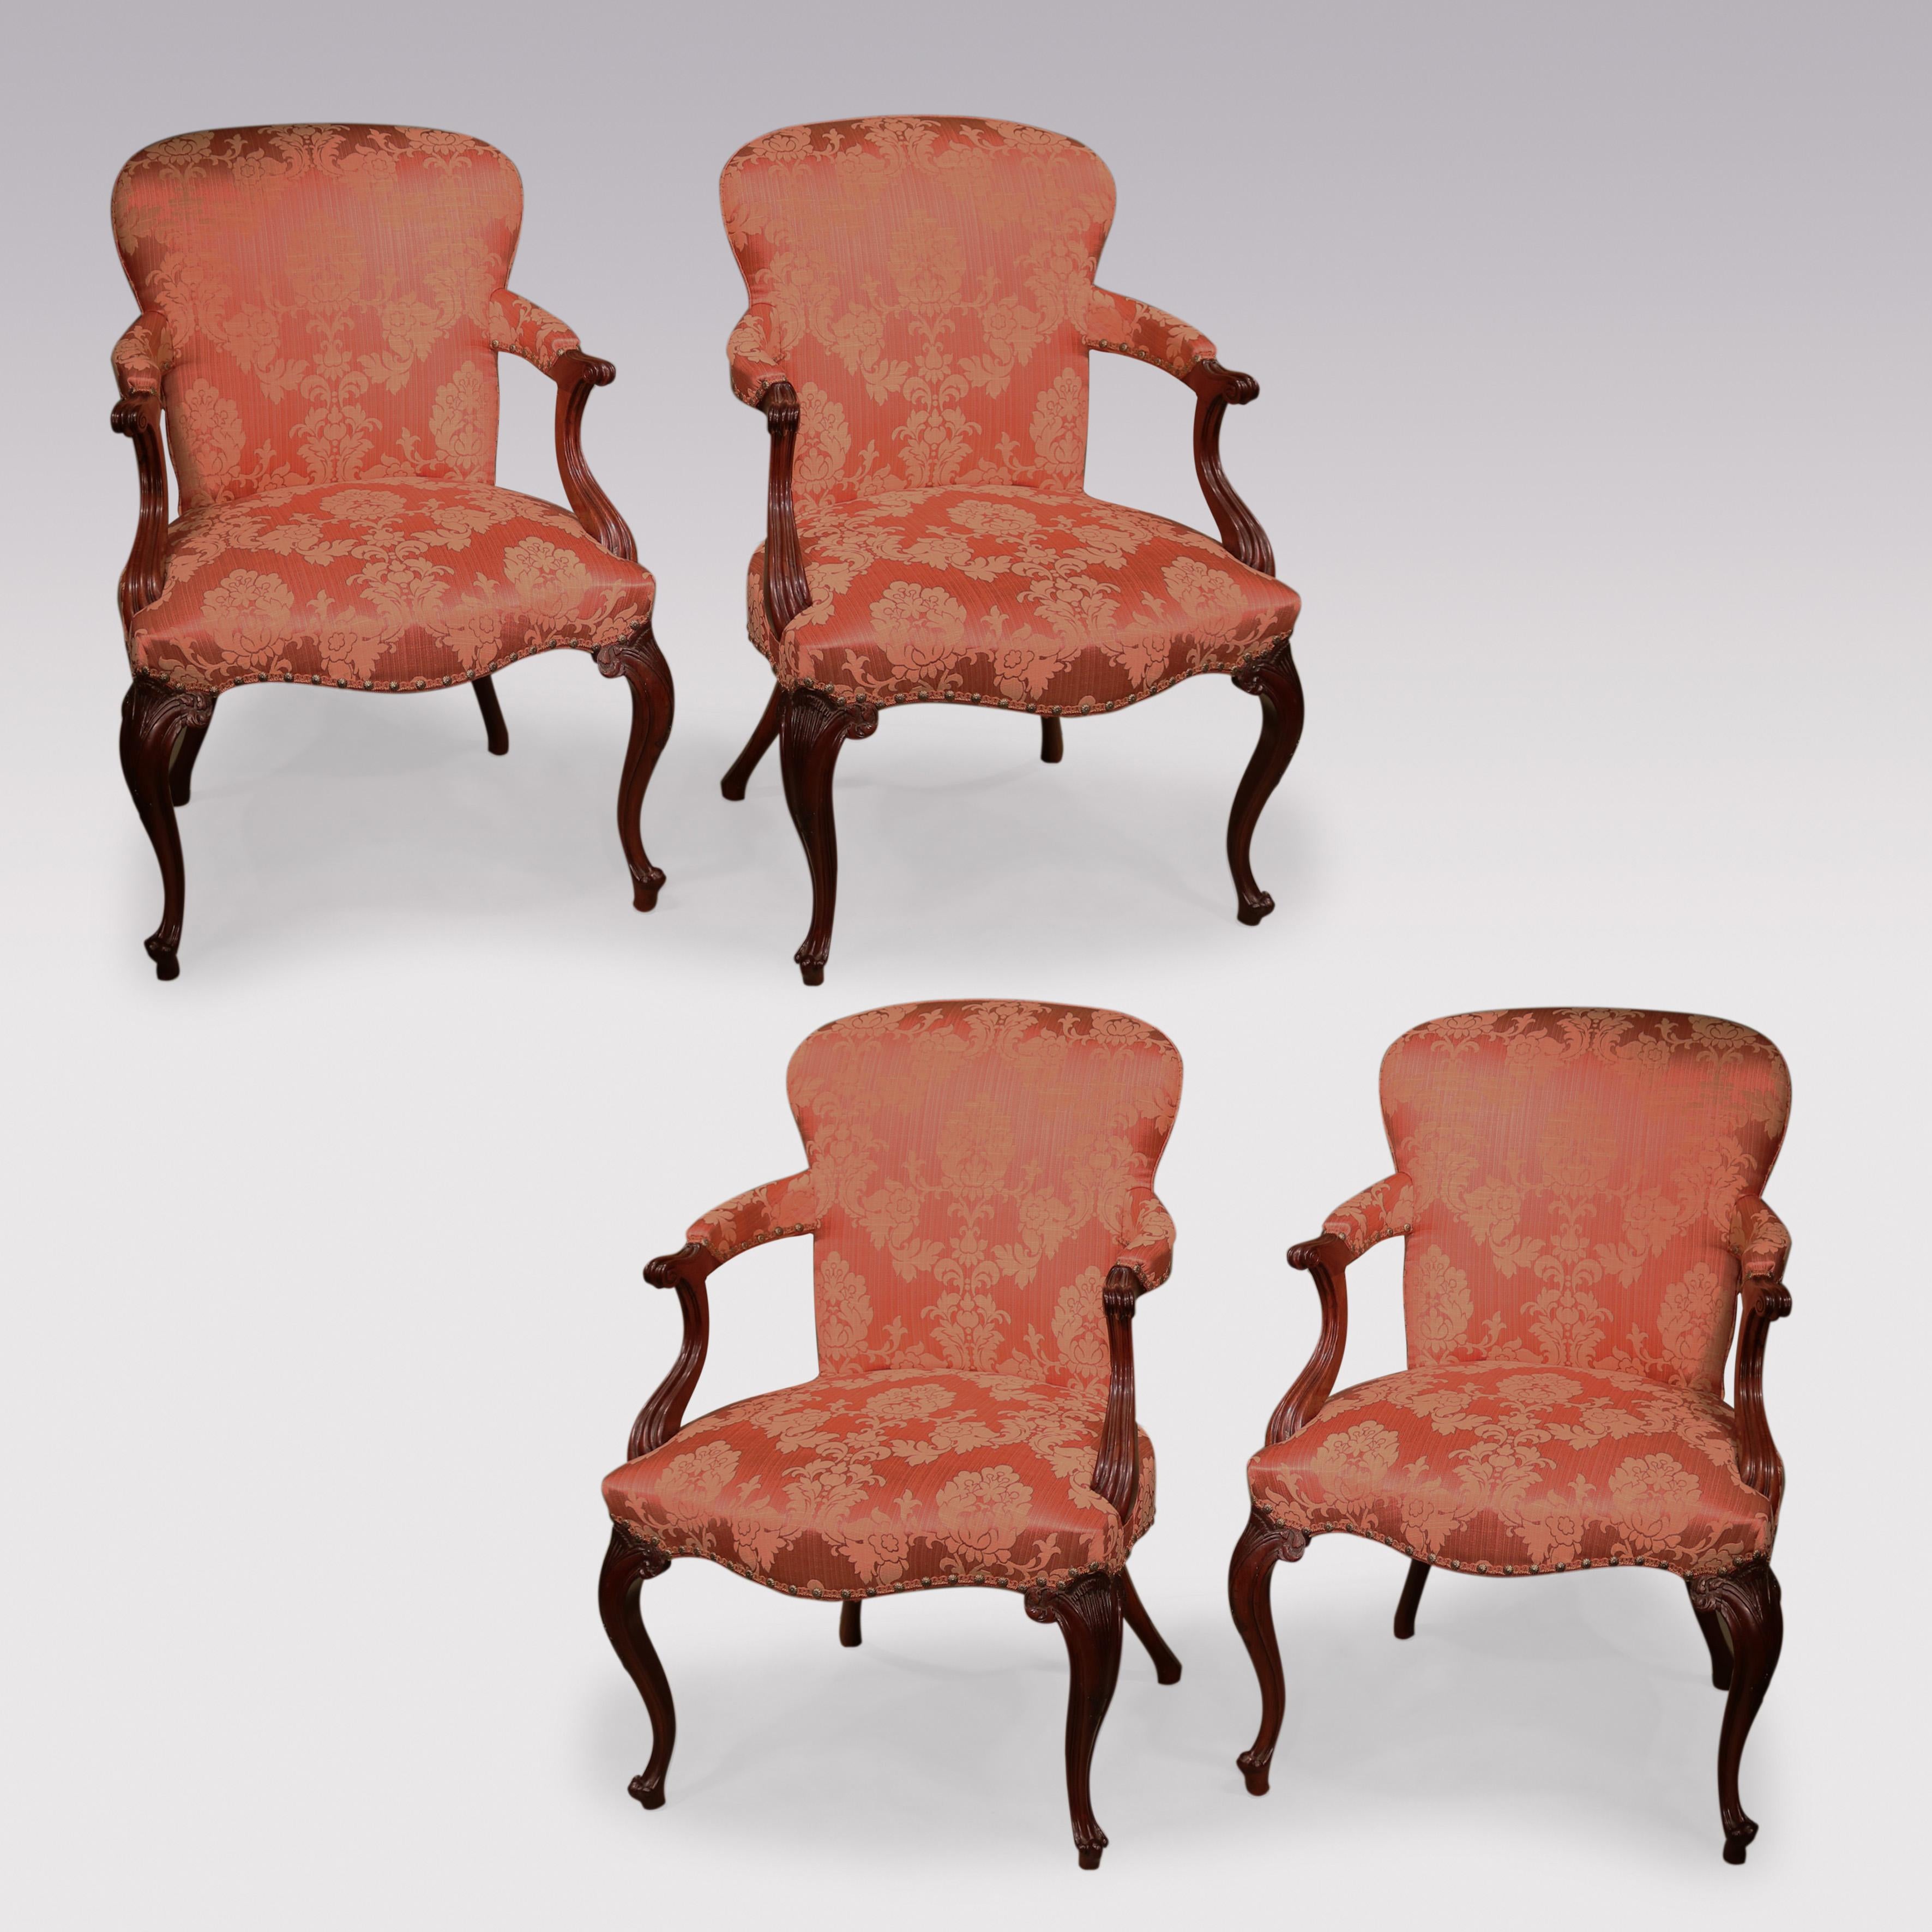 A fine set of 4 late 18th Century Hepplewhite period mahogany upholstered Armchairs in the French manner, having shaped backs & setback scroll-end moulded arms.  The chairs with serpentine shaped stuffover seats, supported on carved cabriole legs